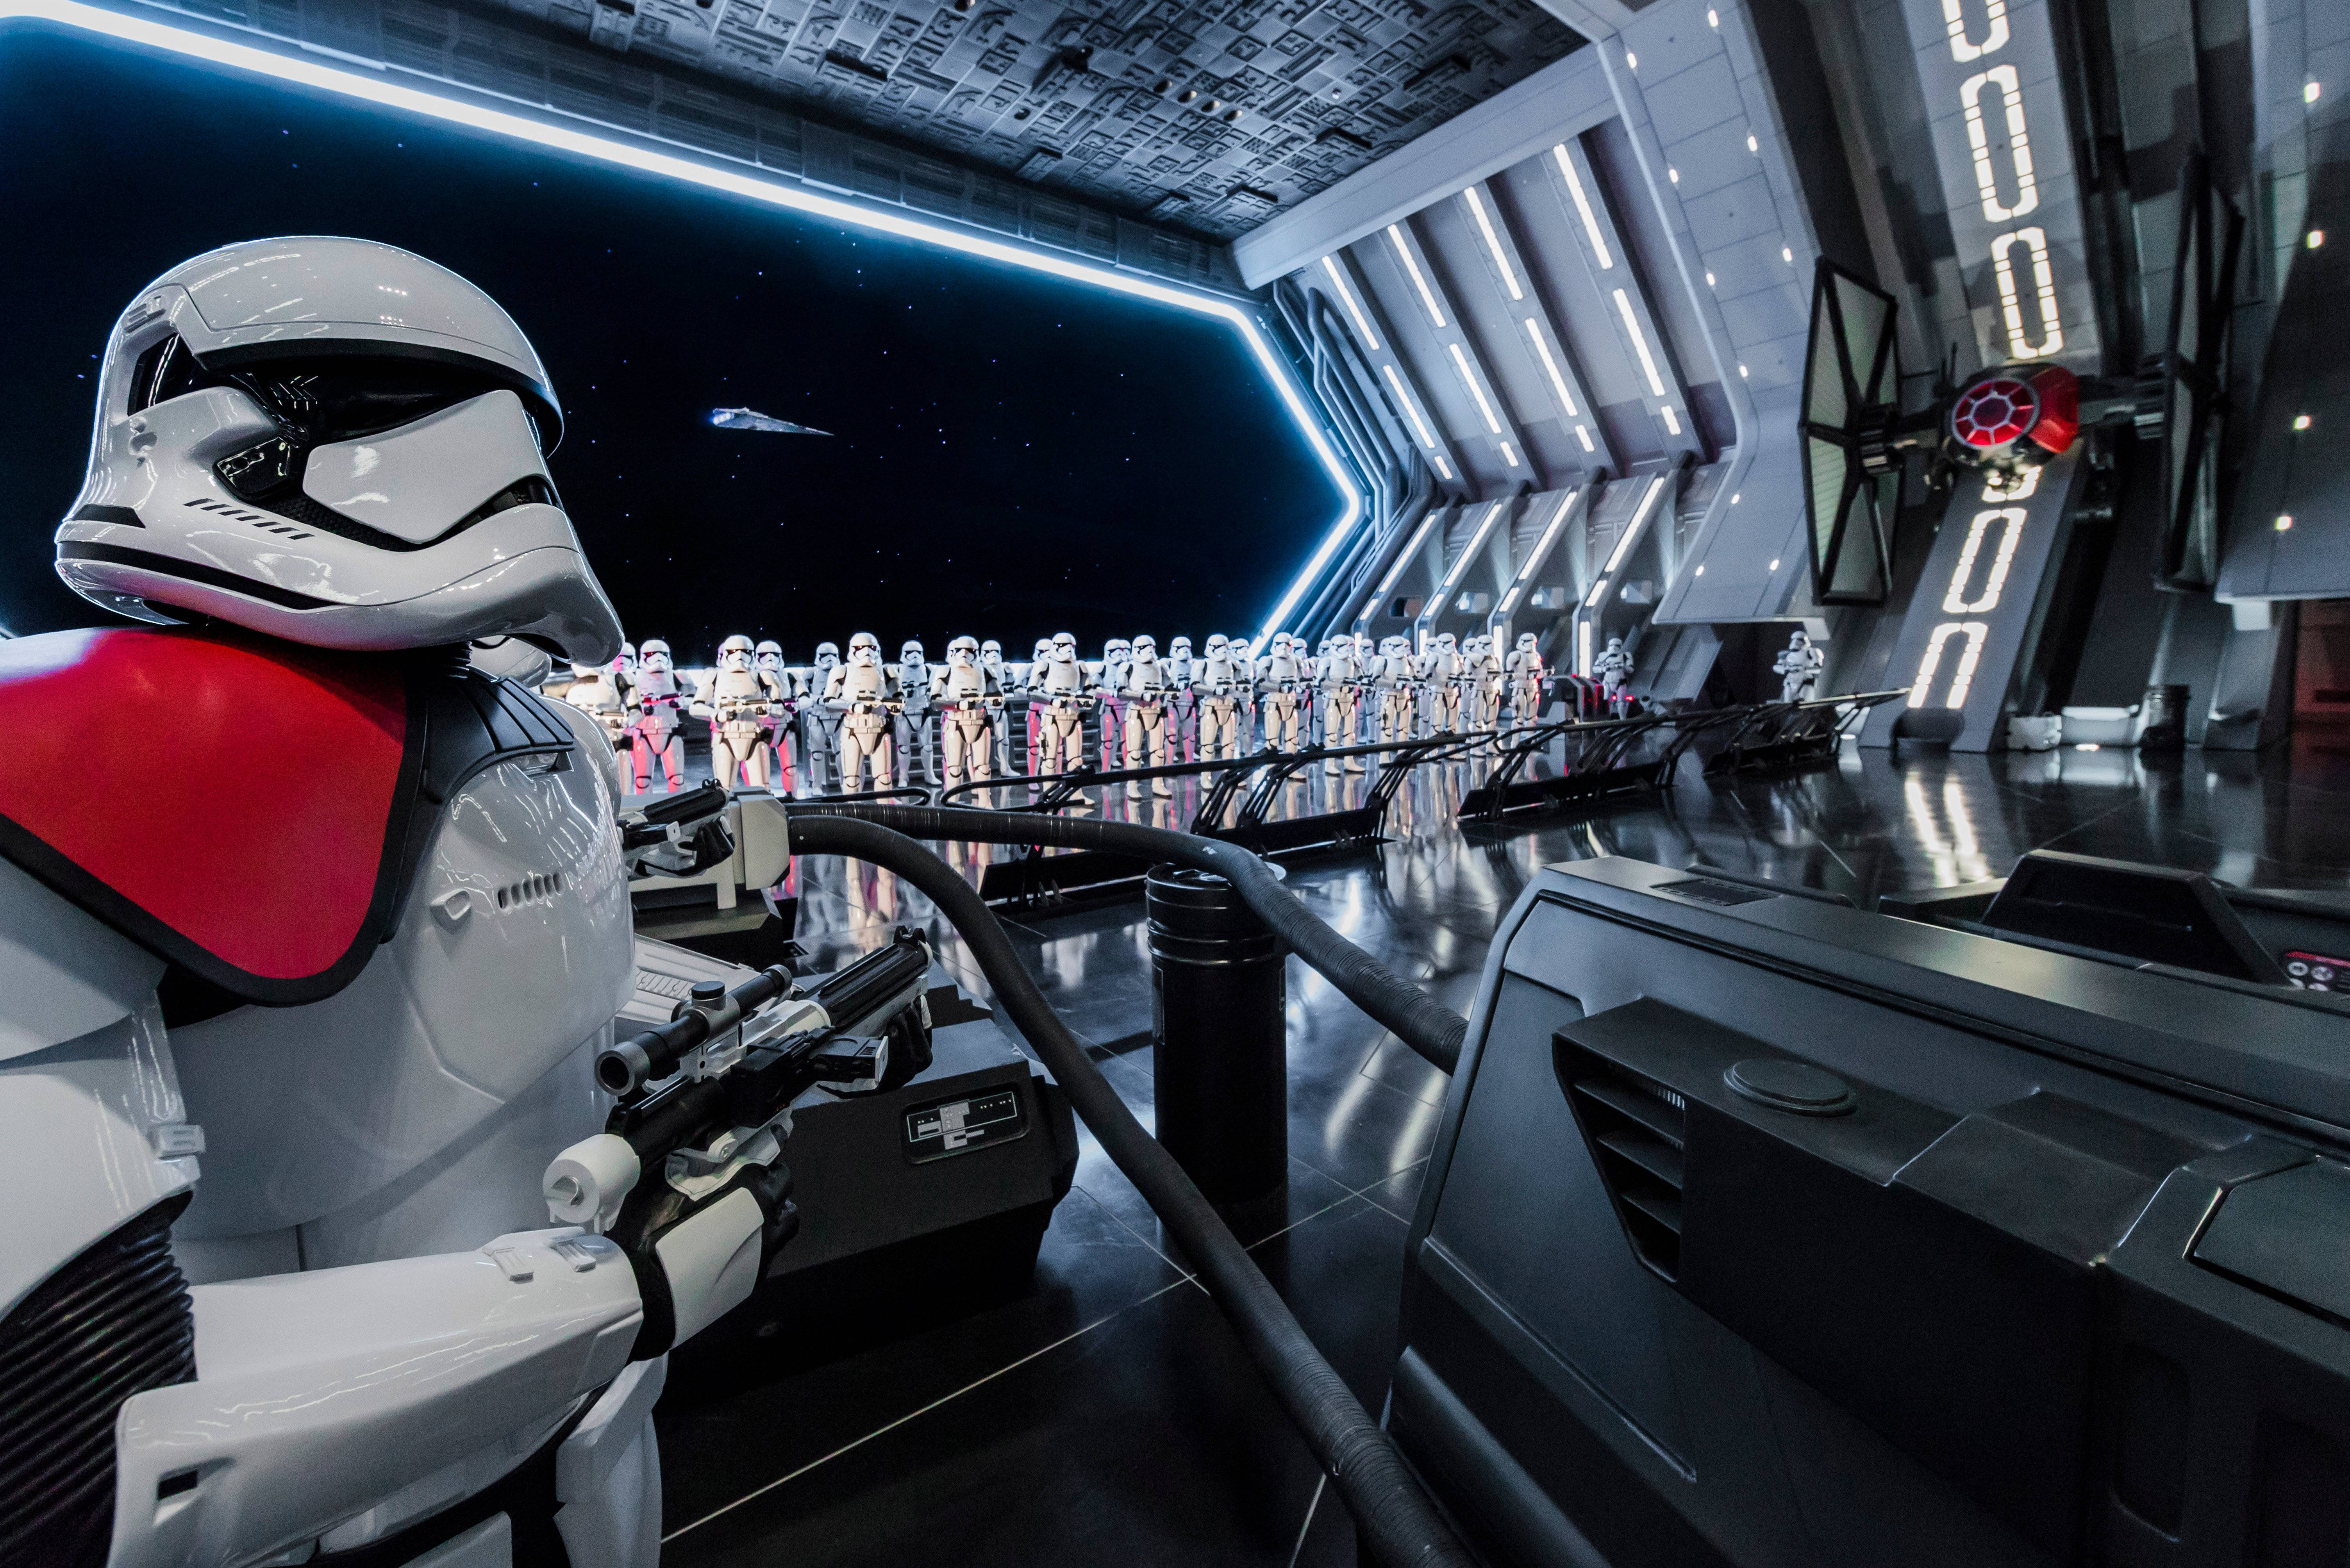 New details on Star Wars: Rise of the Resistance ride experience and backstory